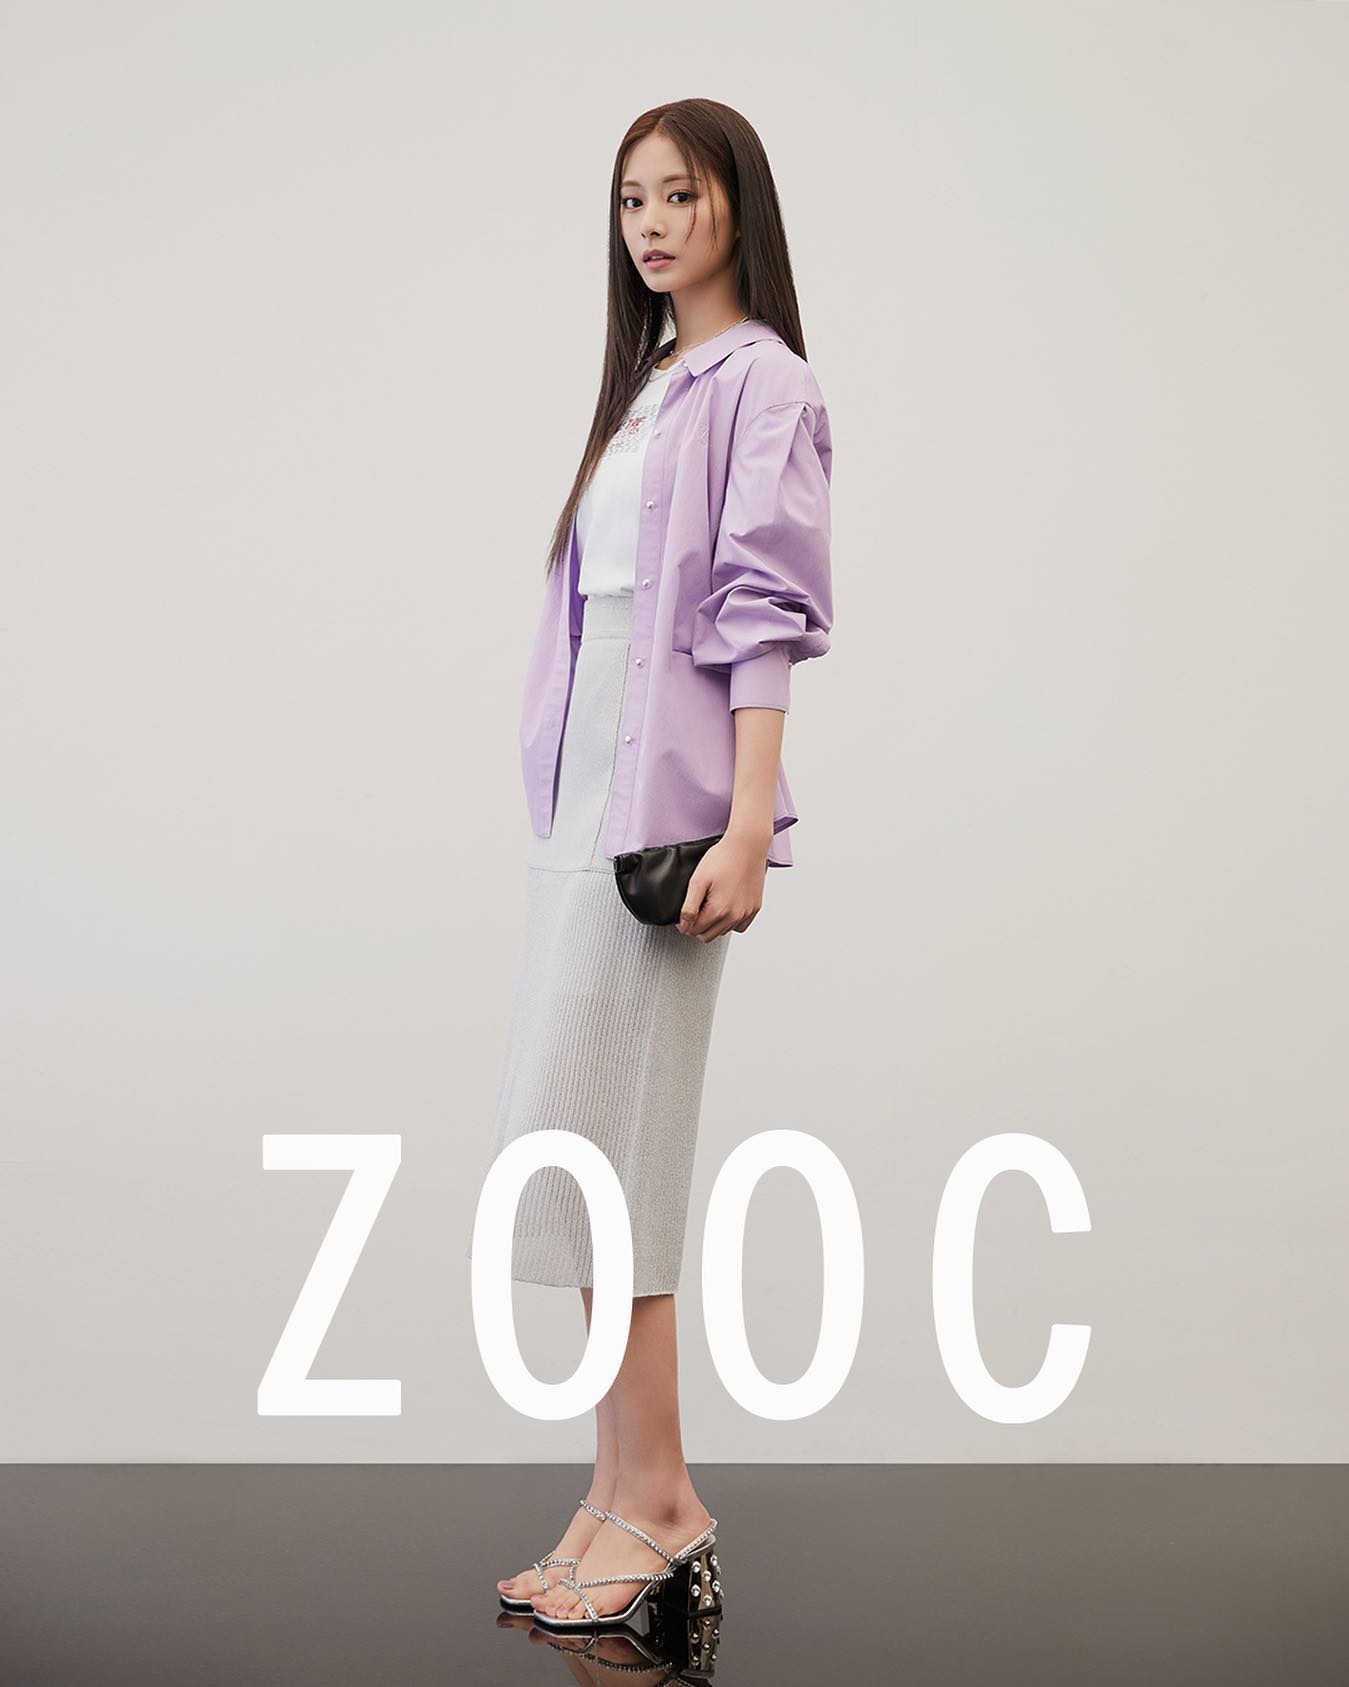 zooc_official_20230316_p_3059634905919787512_1_3059634905919787512.jpg